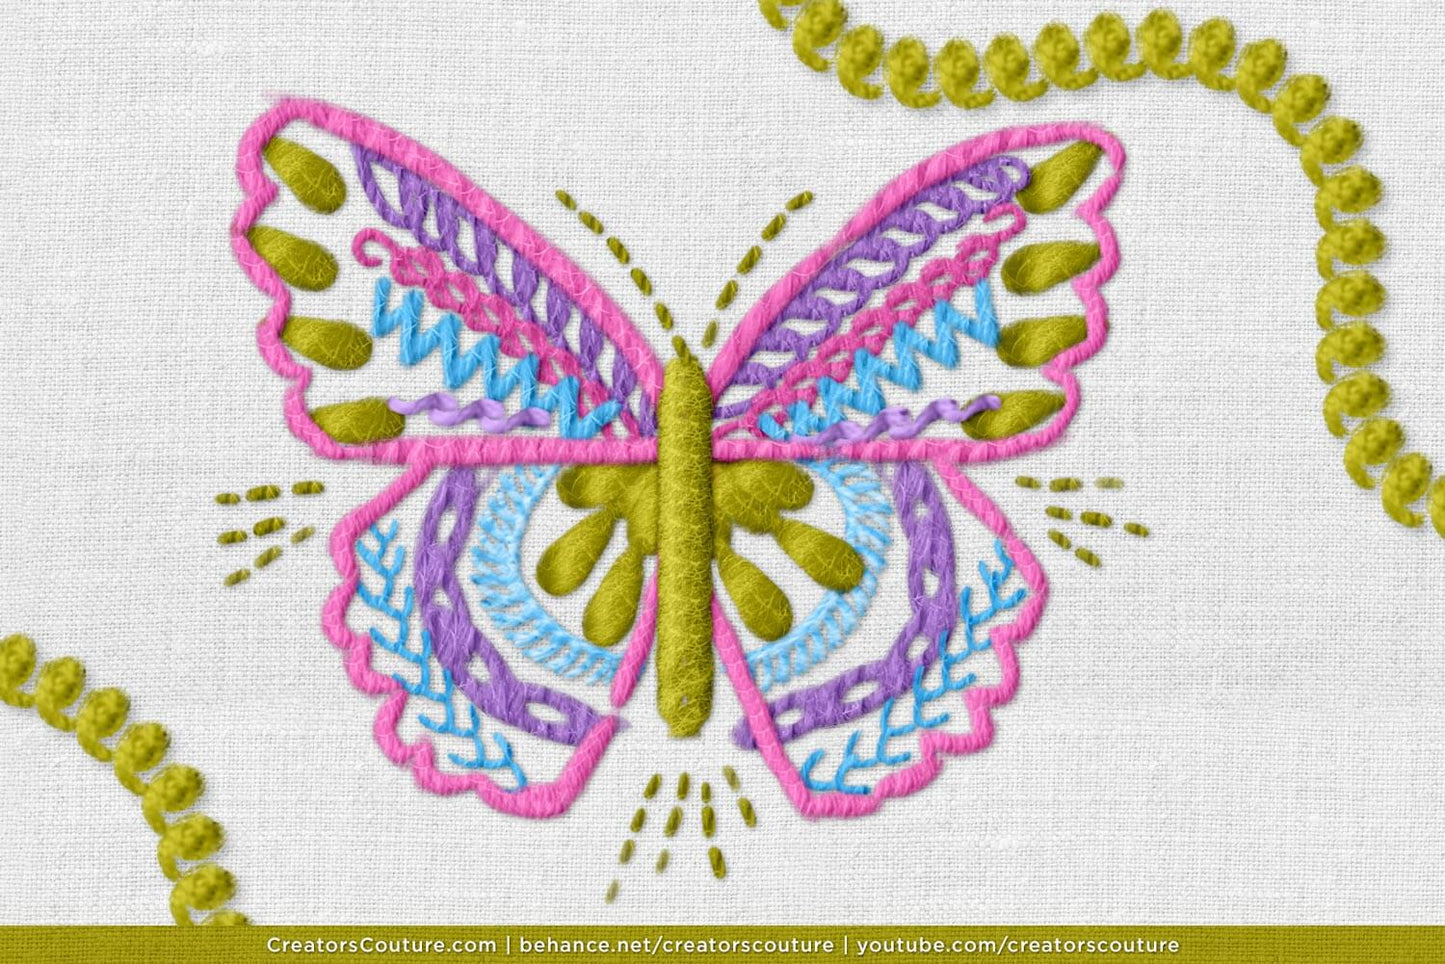 butterfly illustration that has a hand embroidered effect created in Photoshop 